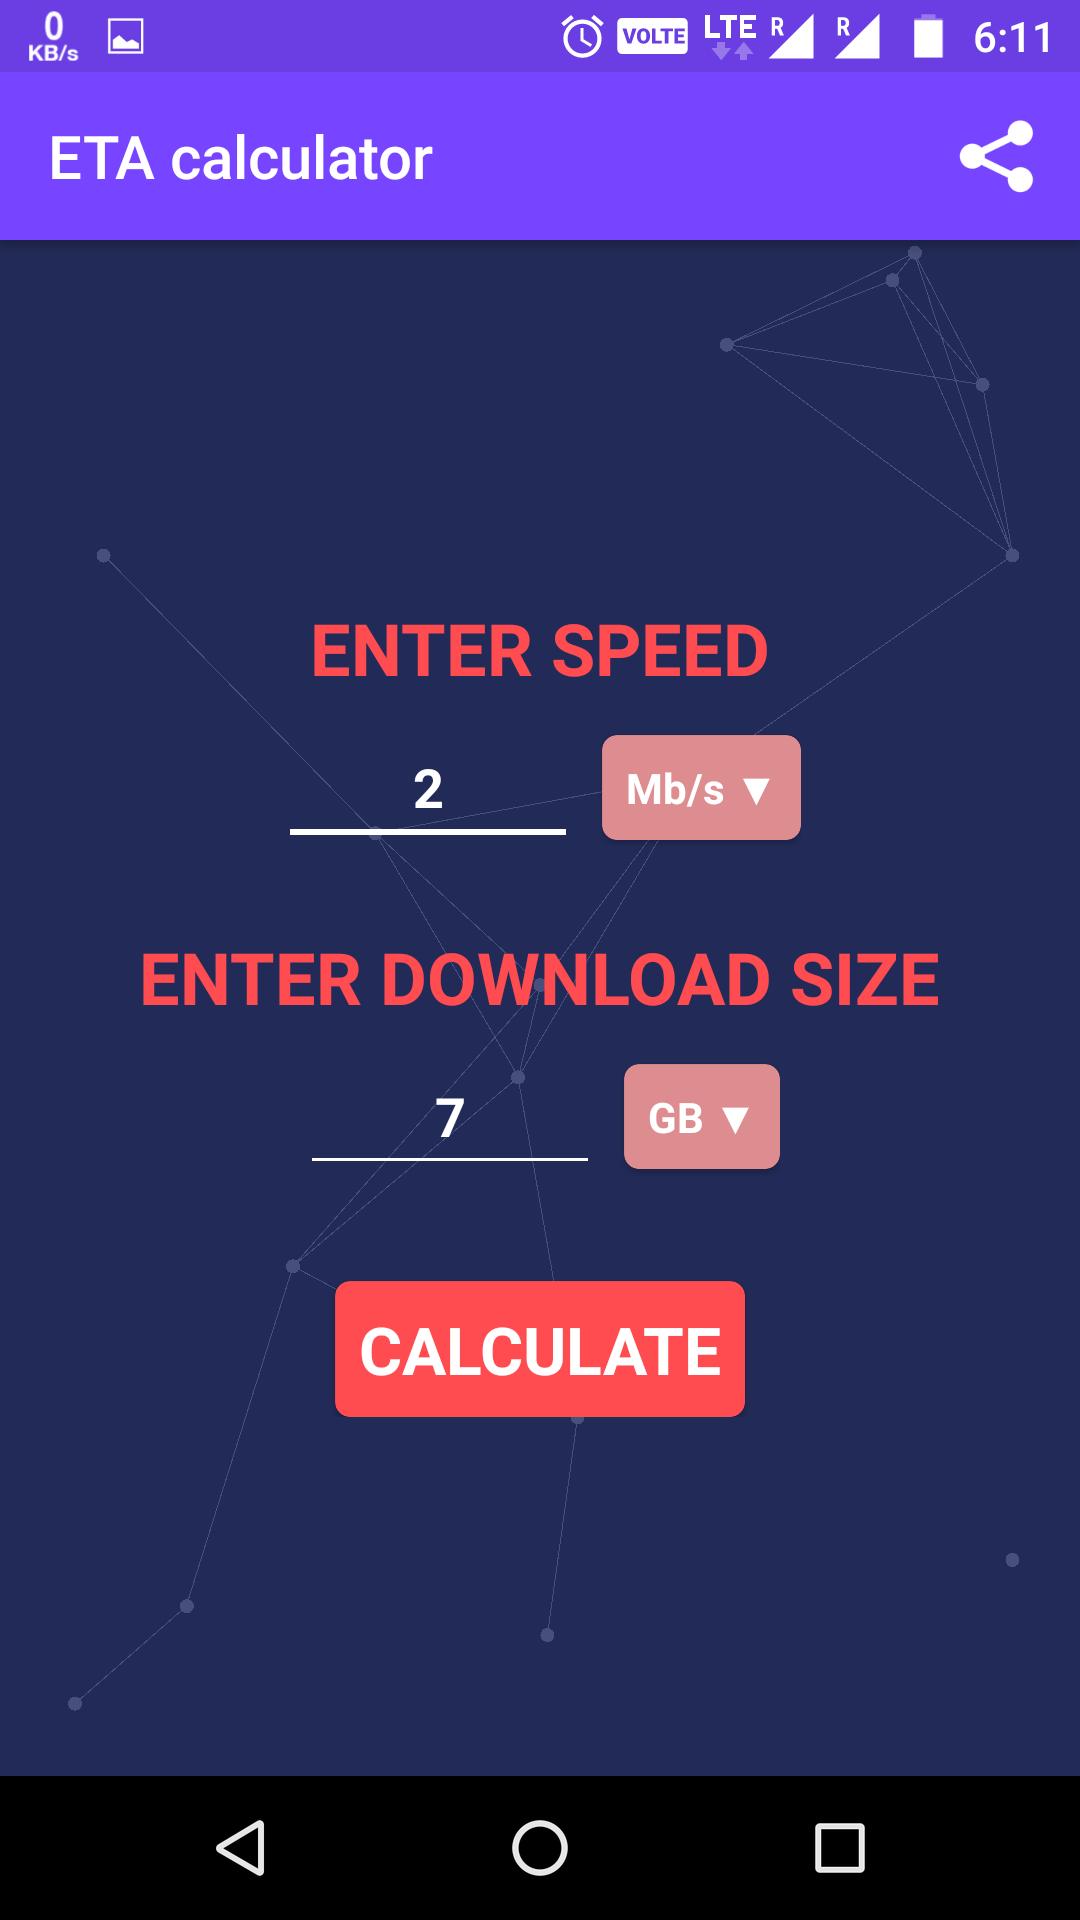 Download Time Calculator - ETA for Android - APK Download